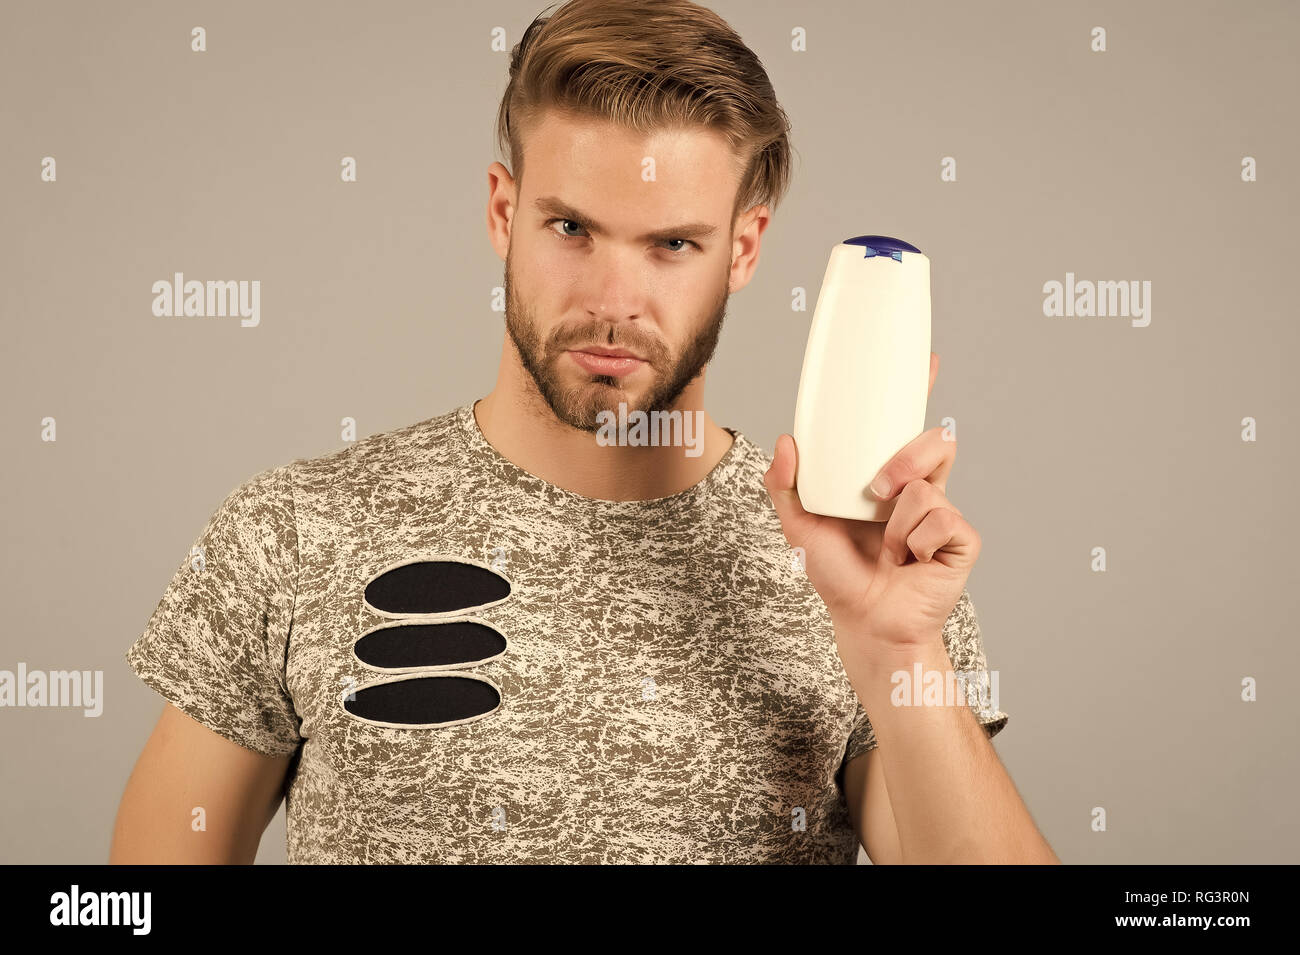 Man enjoy freshness after washing hair with shampoo. Guy with hairstyle  holds bottle shampoo, copy space. Hair care and beauty supplies concept. Man  strict face holds shampoo bottle, grey background Stock Photo -